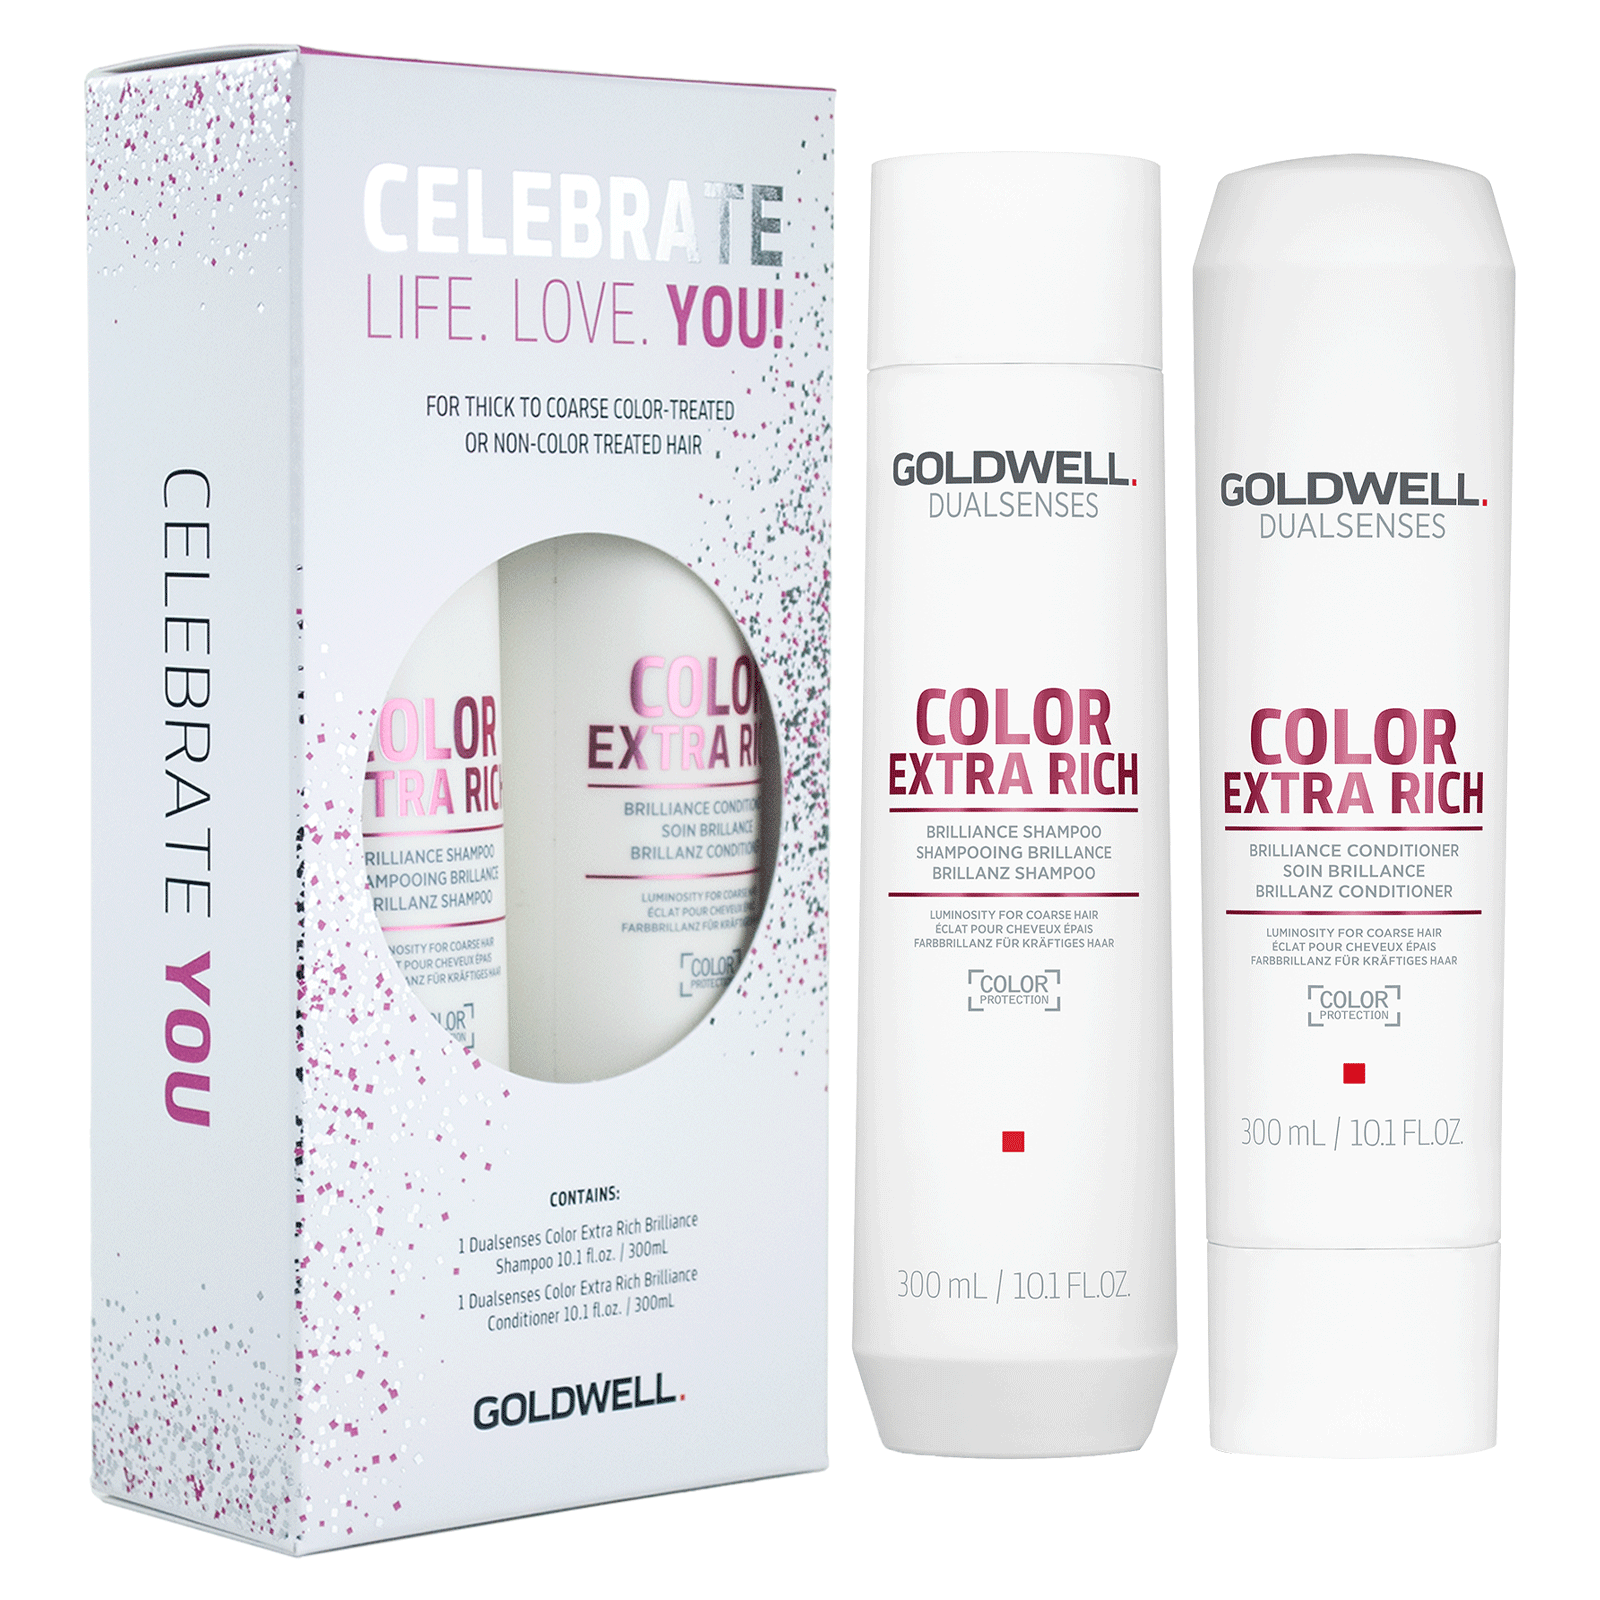 Voorlopige paperback blootstelling Color Extra Rich Holiday Duo - Goldwell USA | CosmoProf